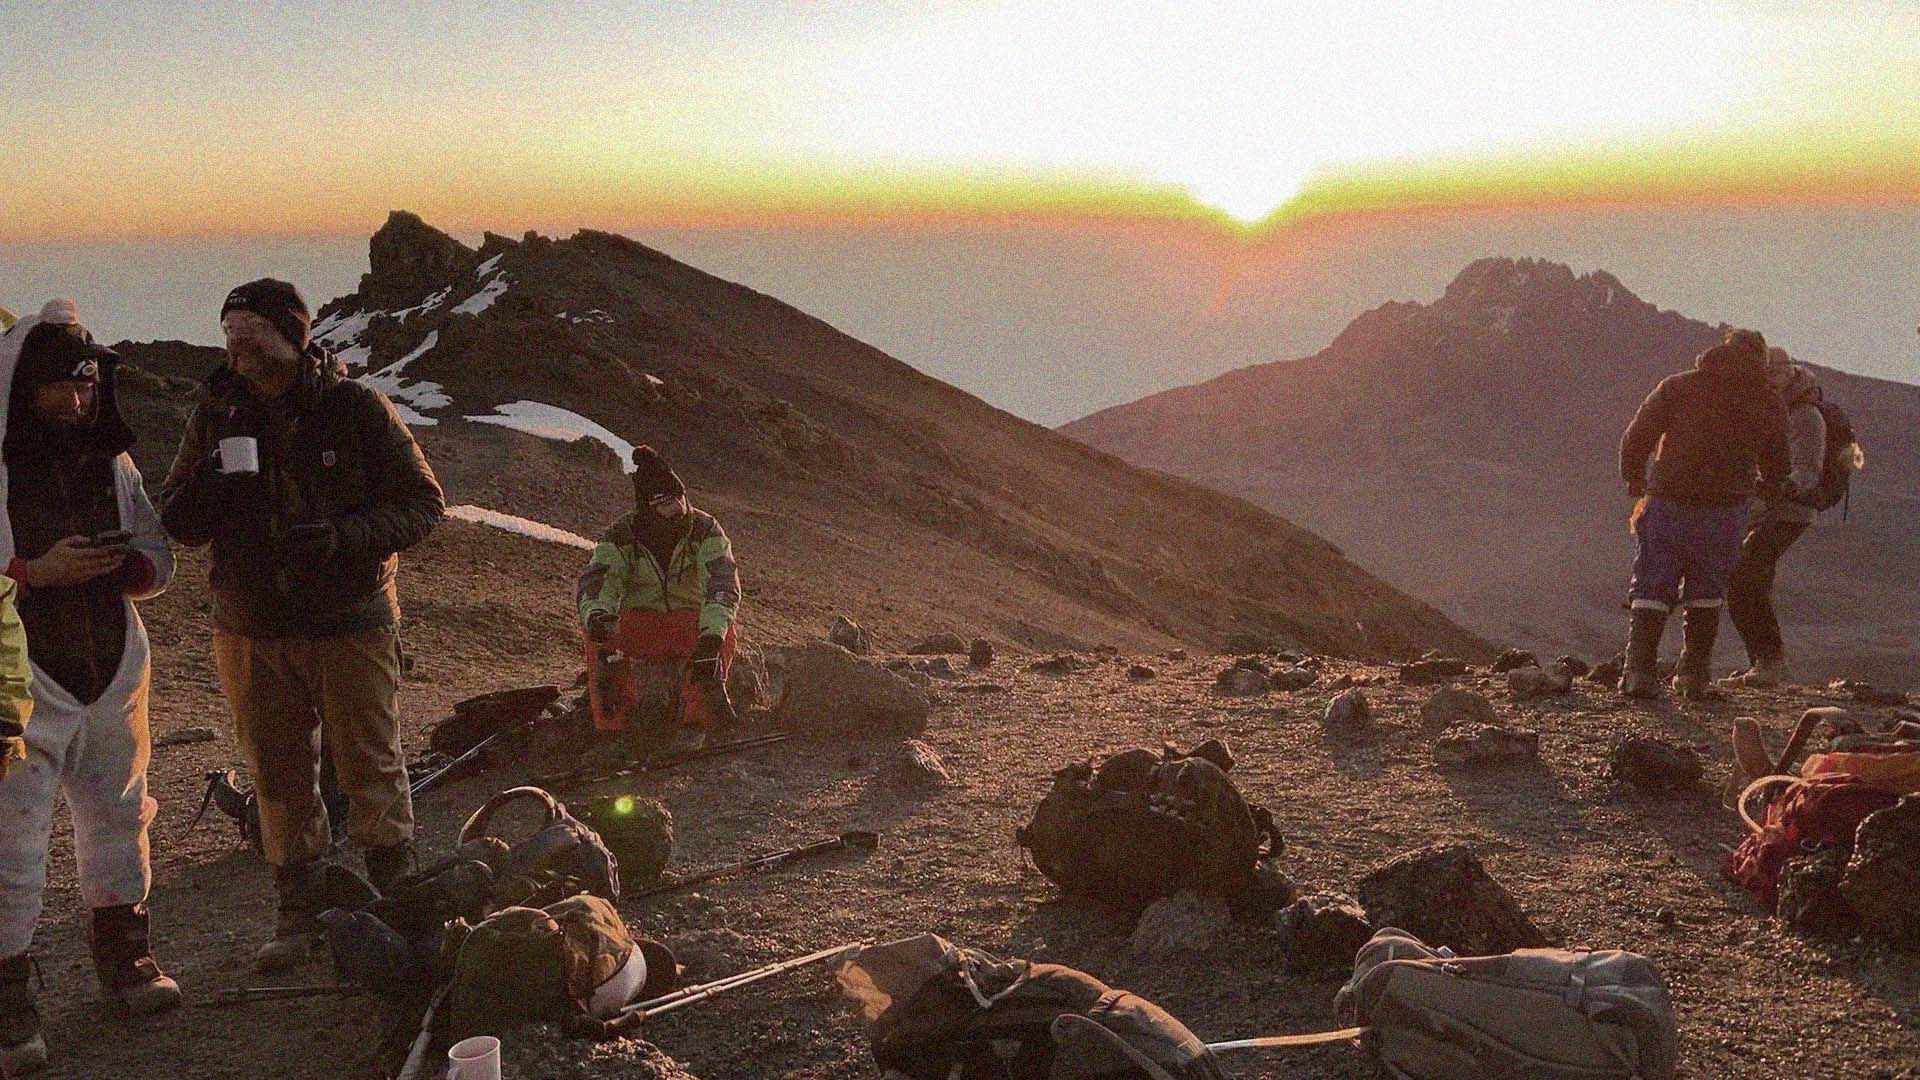 Hikers on Mount Kilimanjaro, wearing cold-weather gear and waking to a spectacular sunrise.